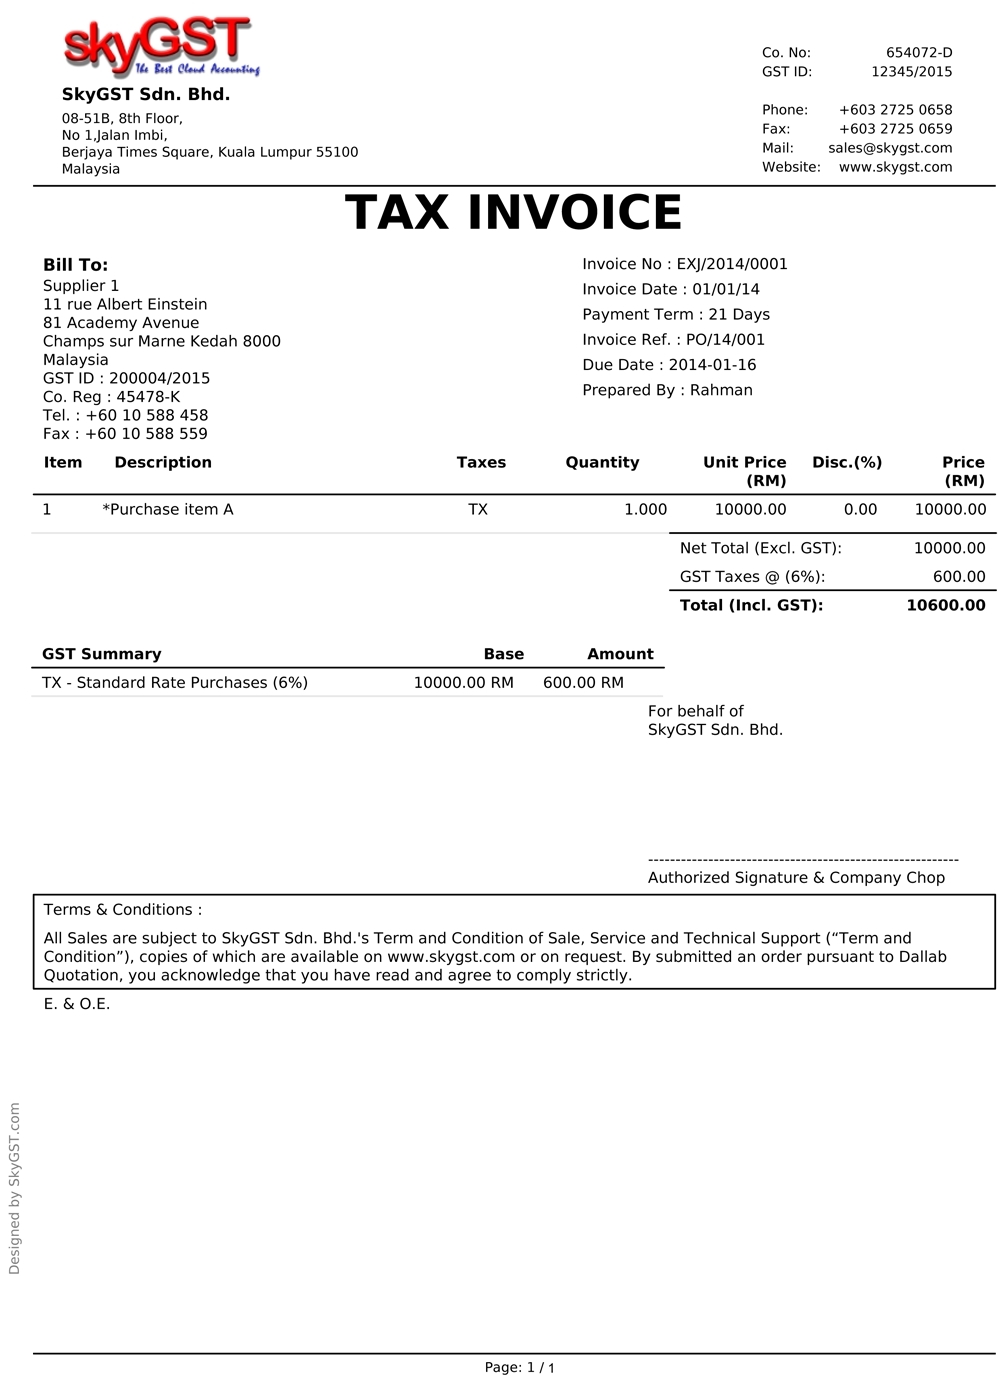 tax invoice example invoice template free 2016 format of tax invoice